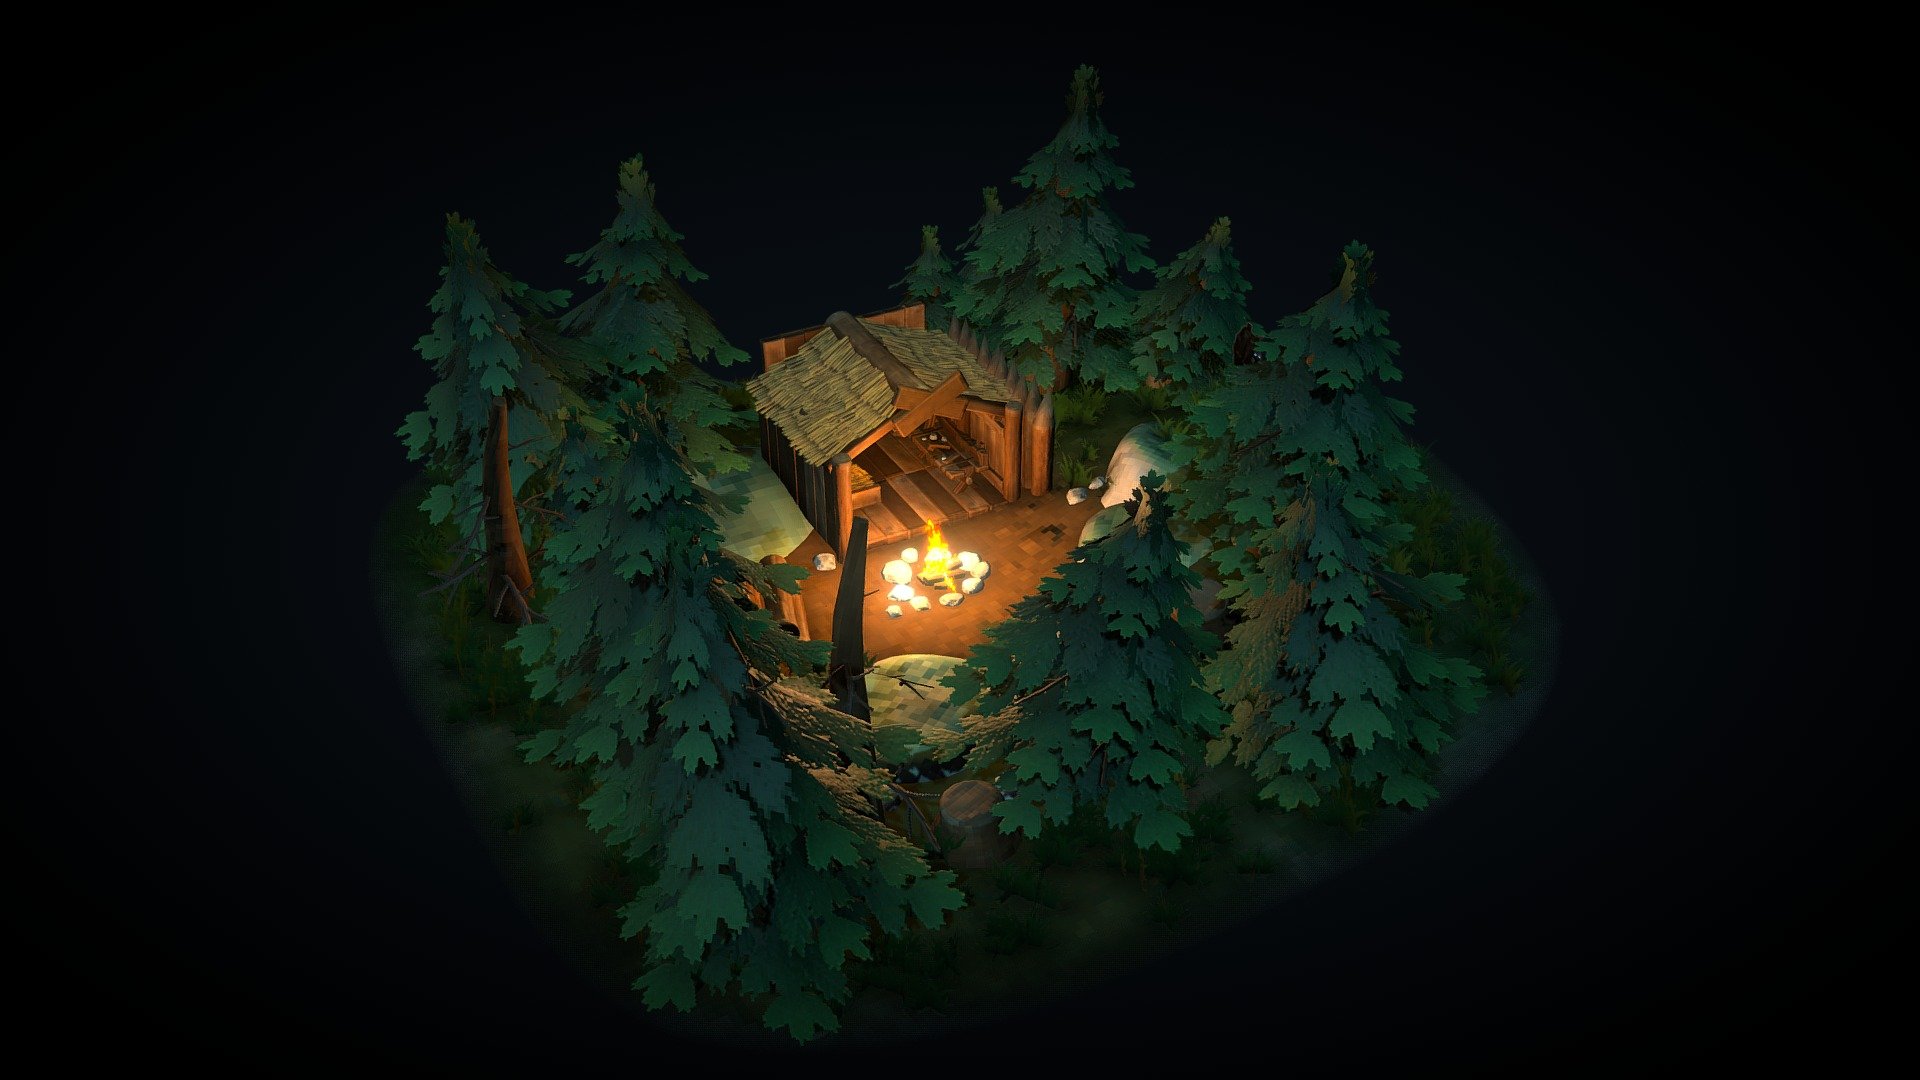 I was really curious on the particular art style the Valheim's devs went for, so i tried to replicate it and make a scene for it! Had a real fun time on this one.
Most of the texture here are made by downscaling to something between 50x50 and 100x100, depending on the size of the object, and then upscaling to a normal txt size (512 or 1024), keeping the hard edges of the pixels.
This method specifically on the normal map is what gives really strange results that match the art style.
That said tho, i think the devs are using some sort of shader in the engine to achieve the style! - Valheim Black Forest - Download Free 3D model by Reyhue 3d model